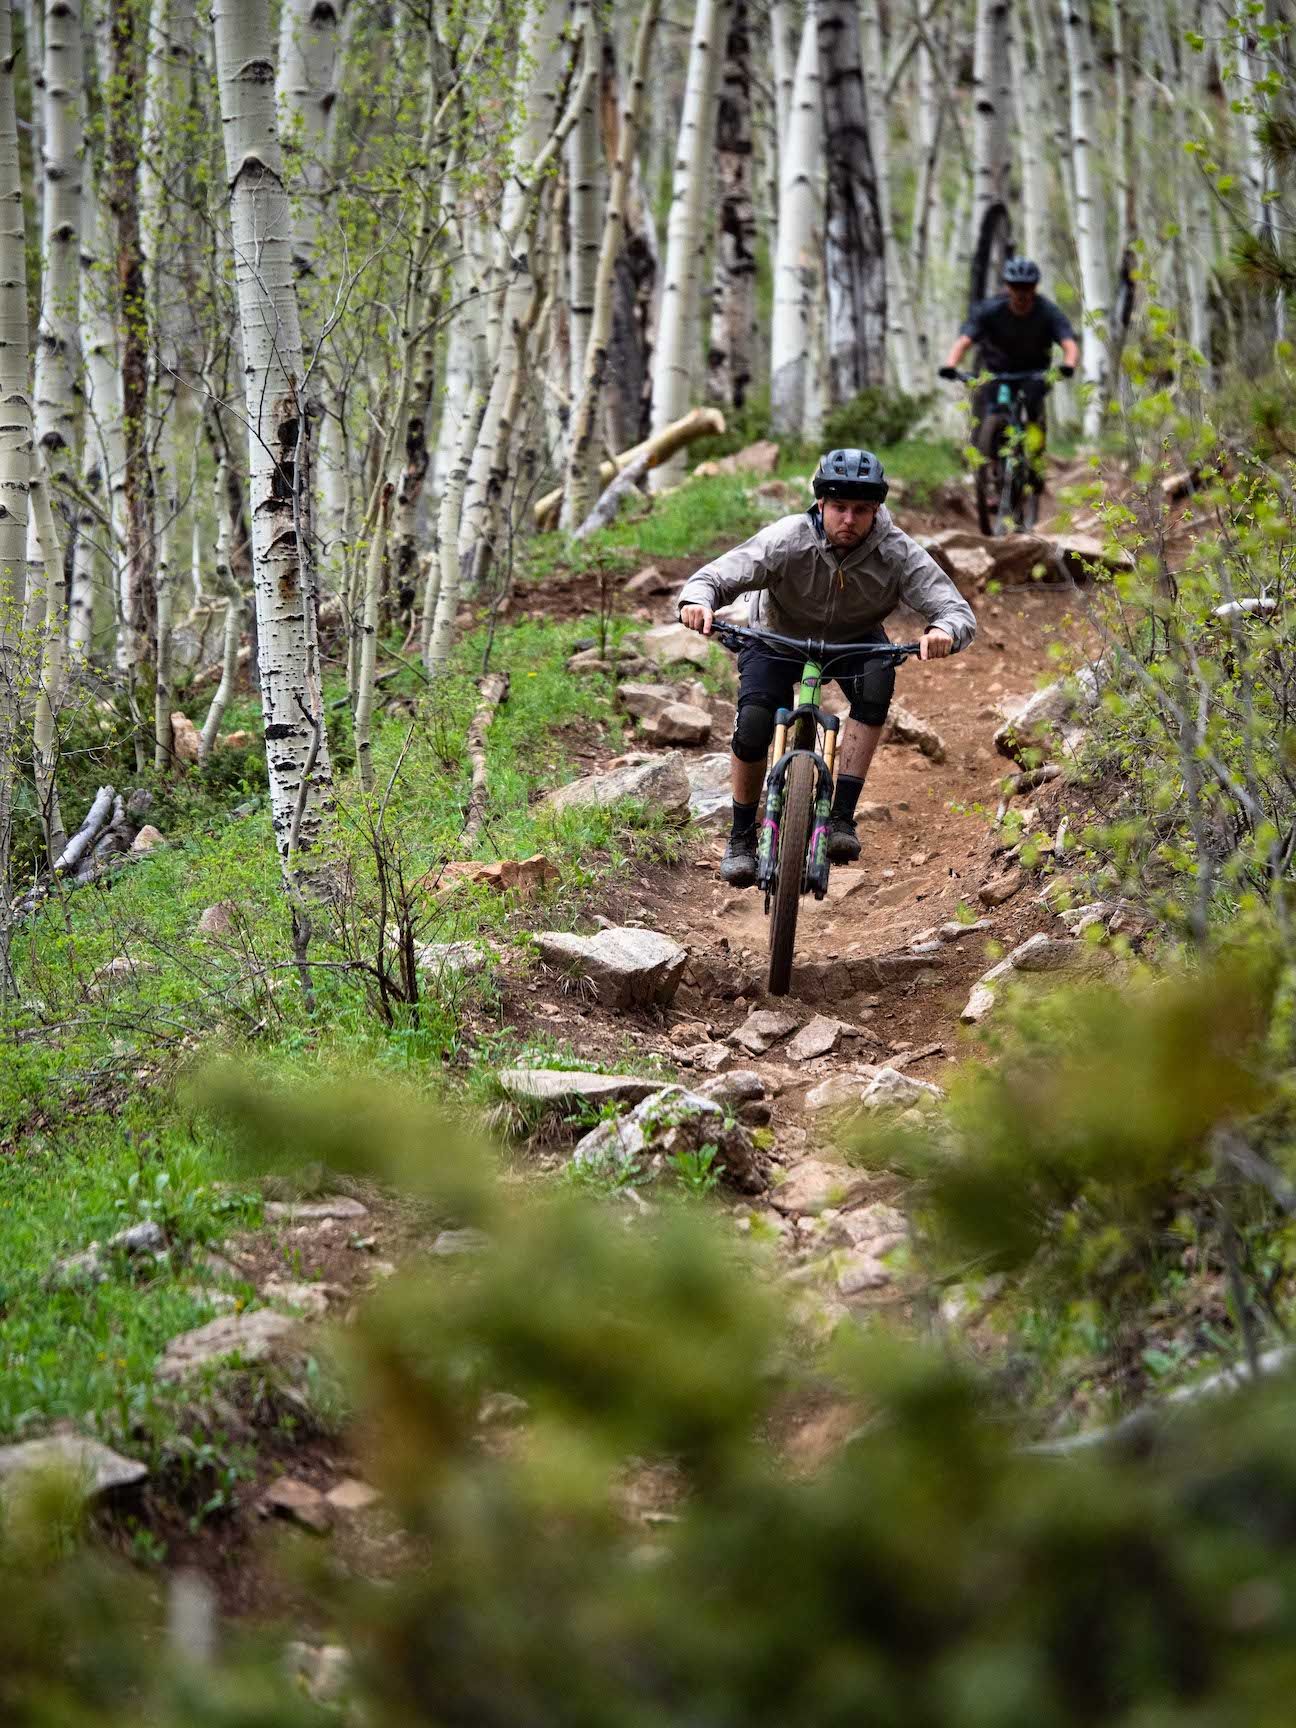 people mountain biking down a steep trail. Doctor Park is a famous MTB trail in Colorado